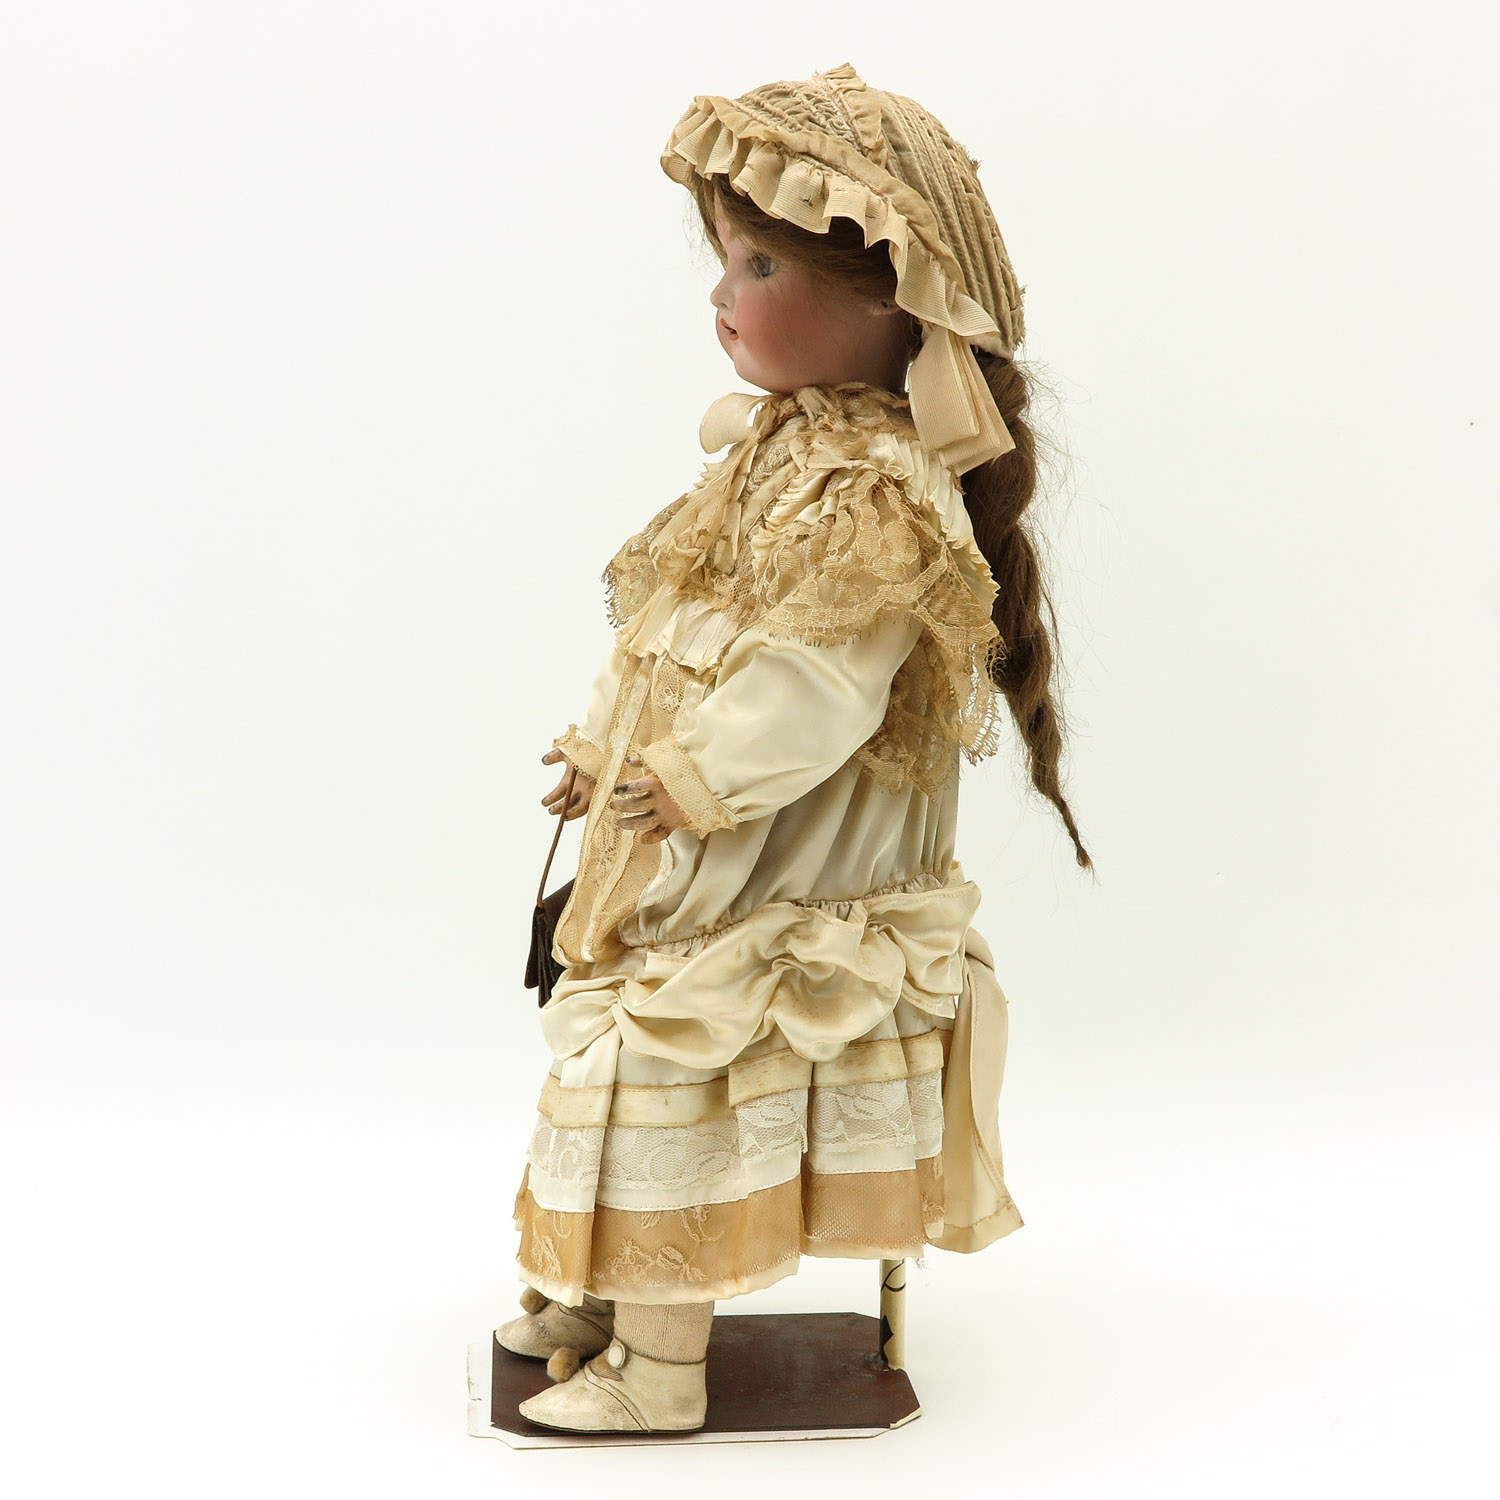 An Antique Halbig Doll - Image 4 of 5